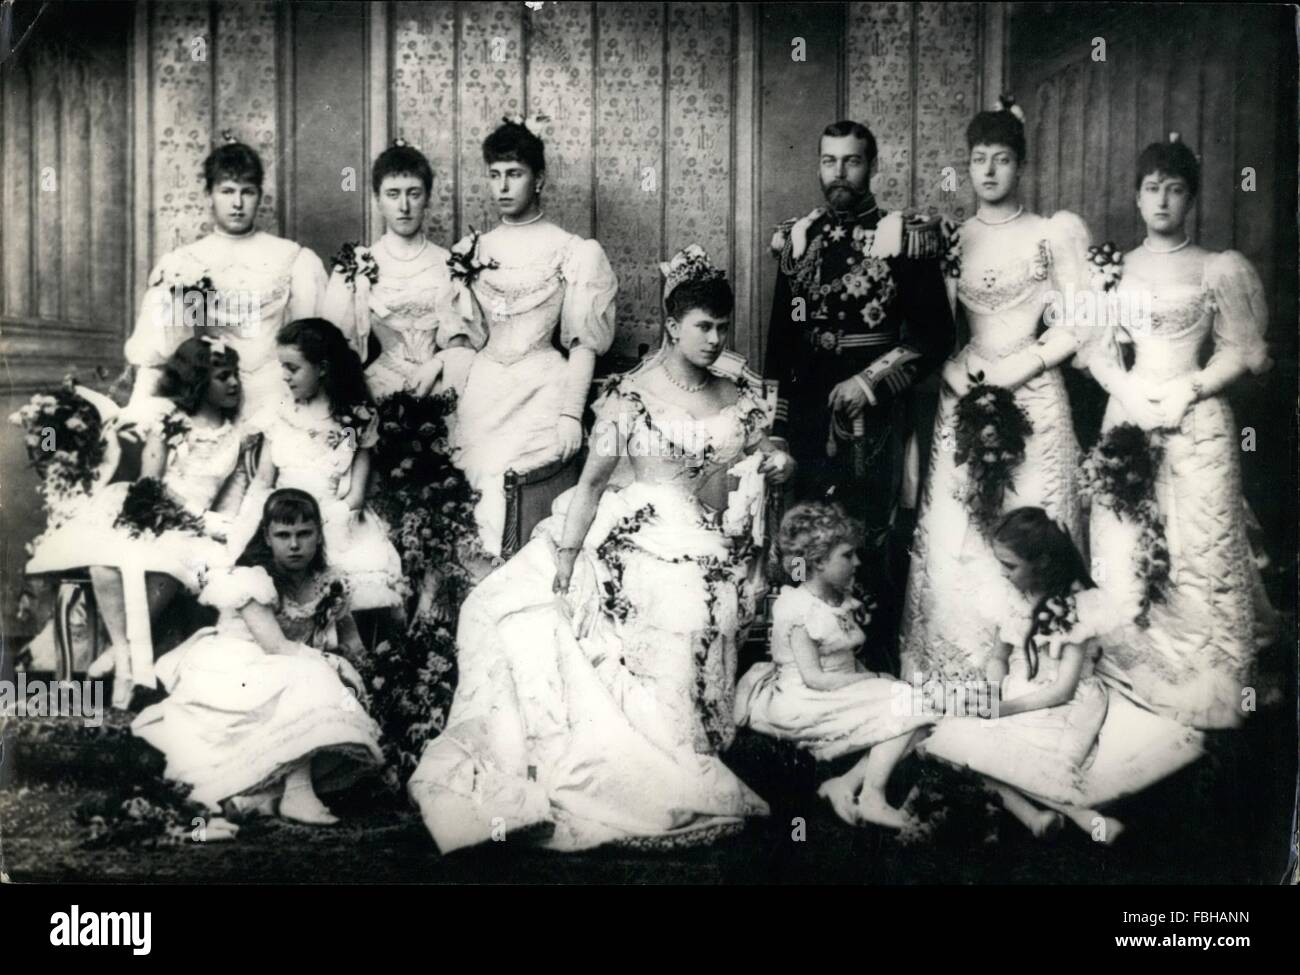 1893 - A flashback in the 90's Prince George's Wedding to Mary 1893; Back row left to right Princess Alexandra of Edinburg, Princess Victoria of Schleawig Holstein, Princess Victoria of Edinburg, Prince George (later King George V) Princess Victoria of Wales, and Princess Maud of Wales, (Later, Queen Maud of Norway). Second row, Princess Alice of Battenburg, Princess Margaret of Connaught, Princess may (the bride) of tech, front row Princess Beatrice of Edinburgh, Princess Victoria of Battenburgh, and Princess Victoria Patricia of Coannaught. (Credit Image: © Keystone Pictures USA/ZUMAPRESS.c Stock Photo